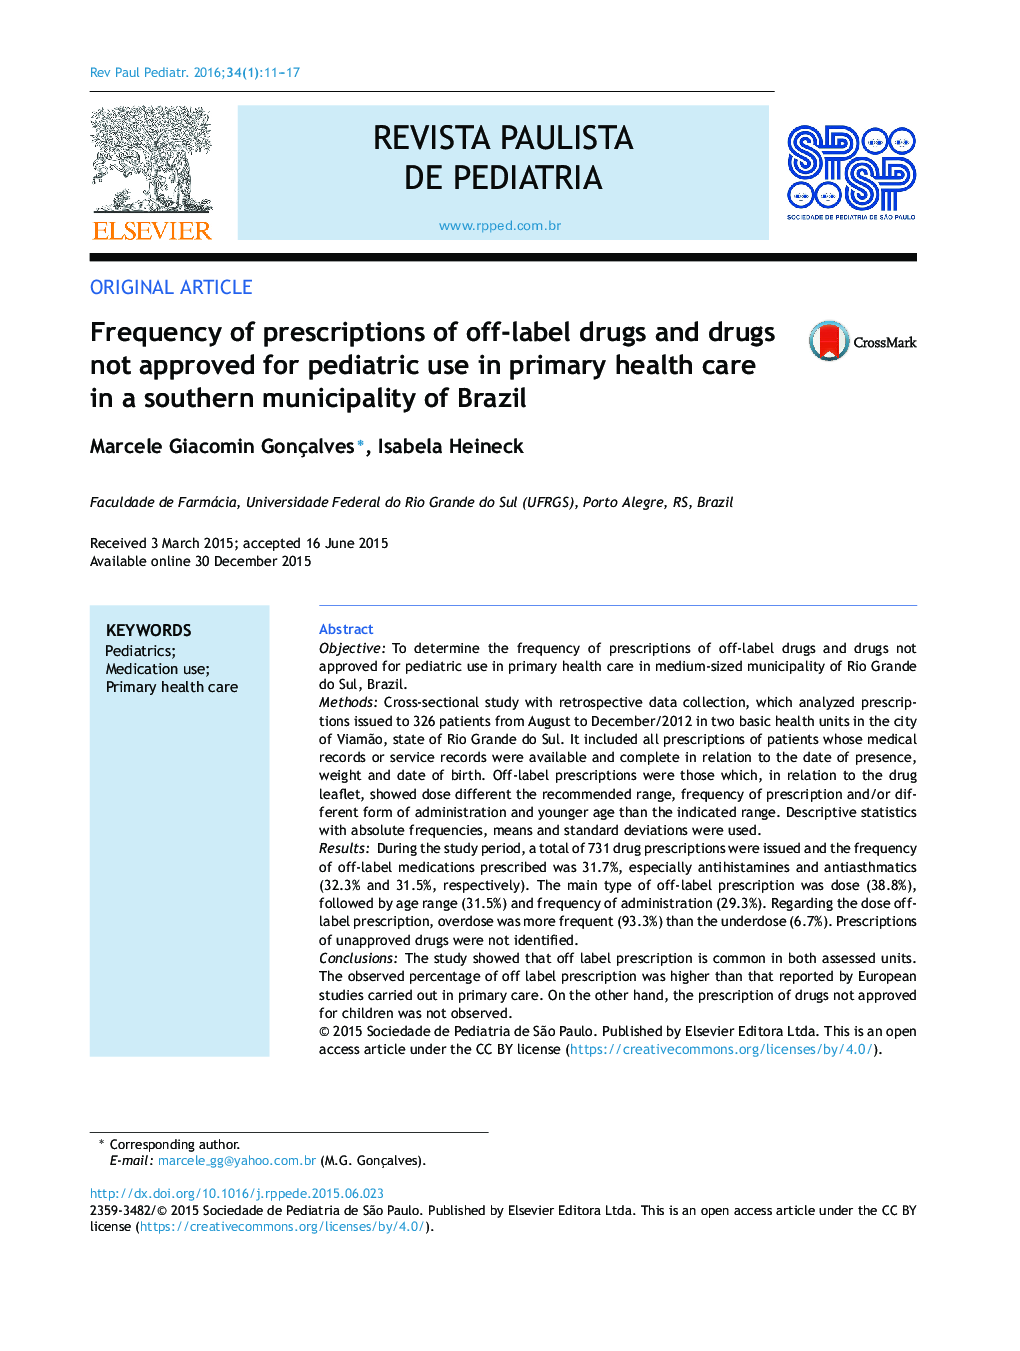 Frequency of prescriptions of off-label drugs and drugs not approved for pediatric use in primary health care in a southern municipality of Brazil